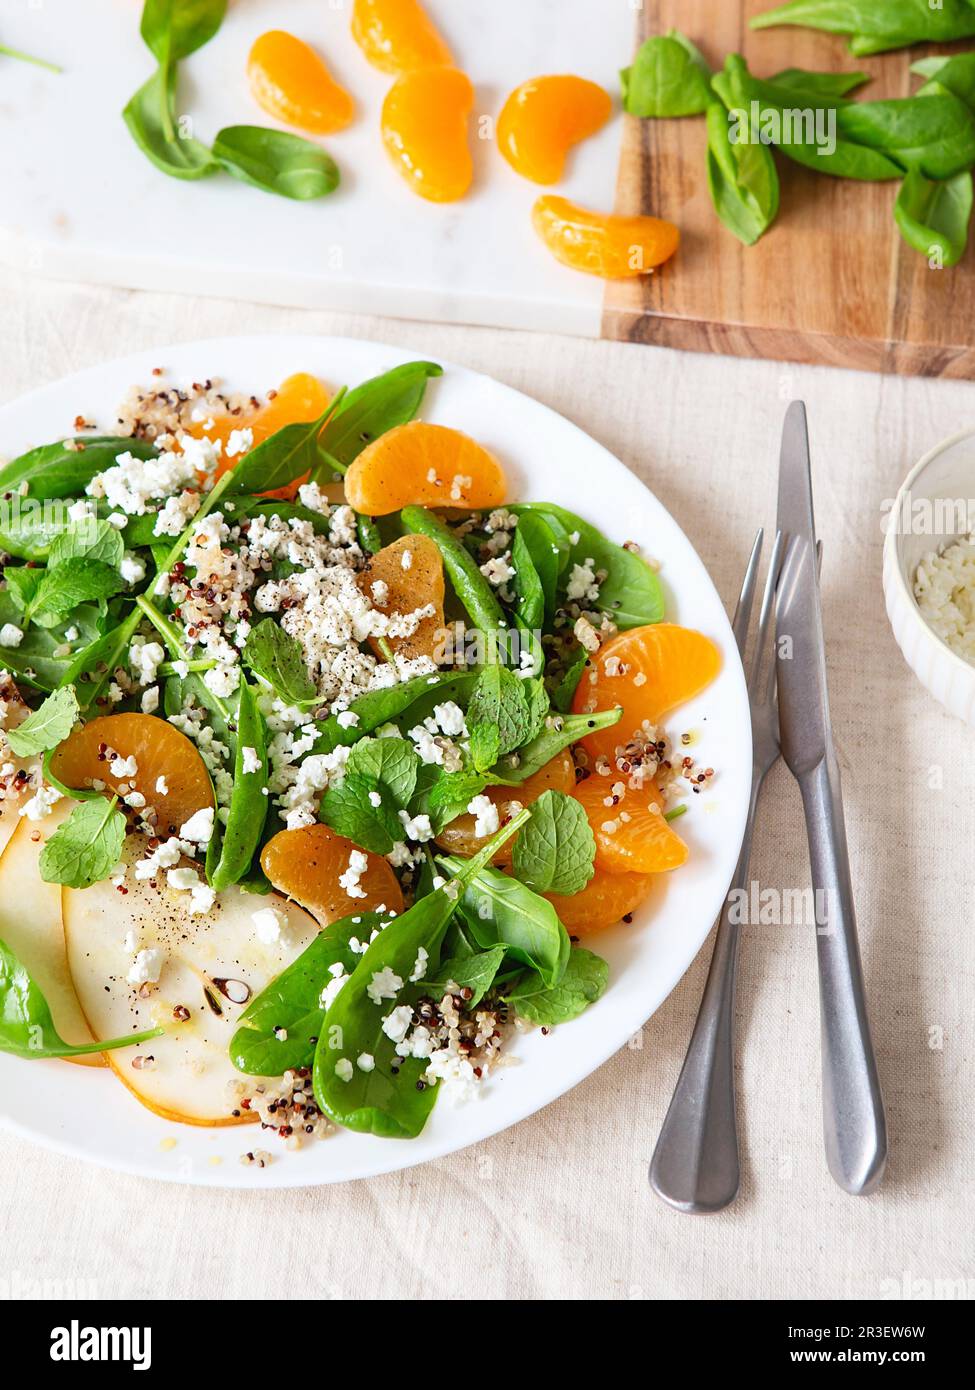 Spinach and quinoa salad with pears, oranges and ricotta. Healthy Meal prep. Plant-based dishes. Green living. Vegan recipe. Foo Stock Photo